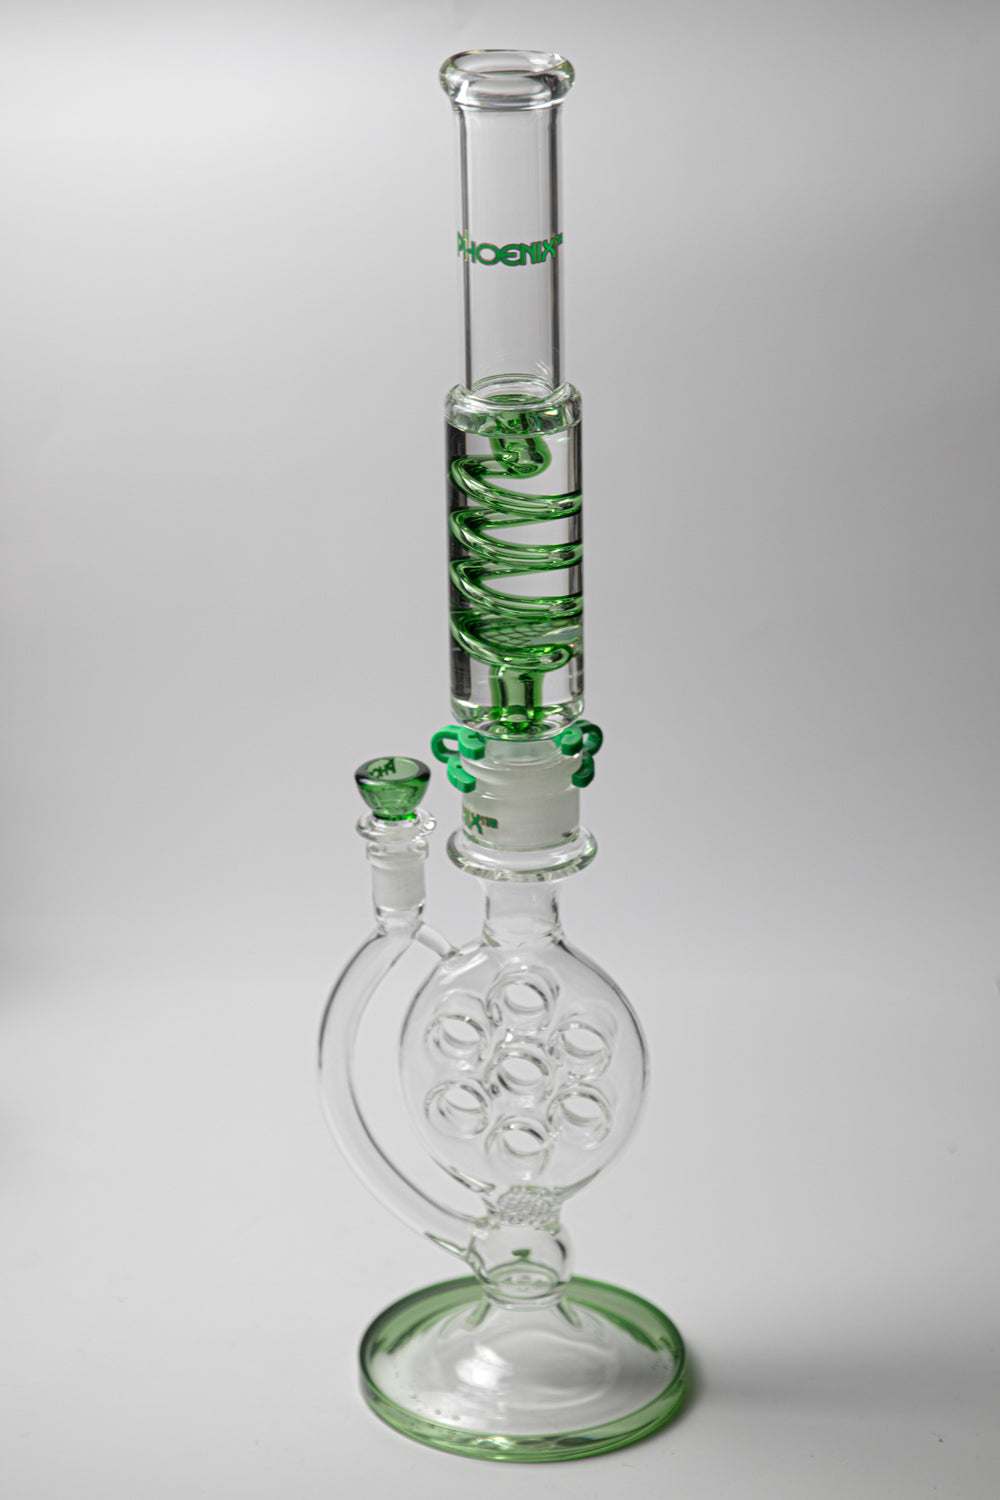 Phoenix Swiss Divided Green Water Pipe – a 21-inch rig for weed and dabs. Now available for sale, this standout piece boasts a striking design, a bowl piece for weed, a bent-down stem, recycler percolator, and a small honeycomb percolator. The incorporated percolators ensure a smooth, cool smoke, preventing water from splashing back . Color green